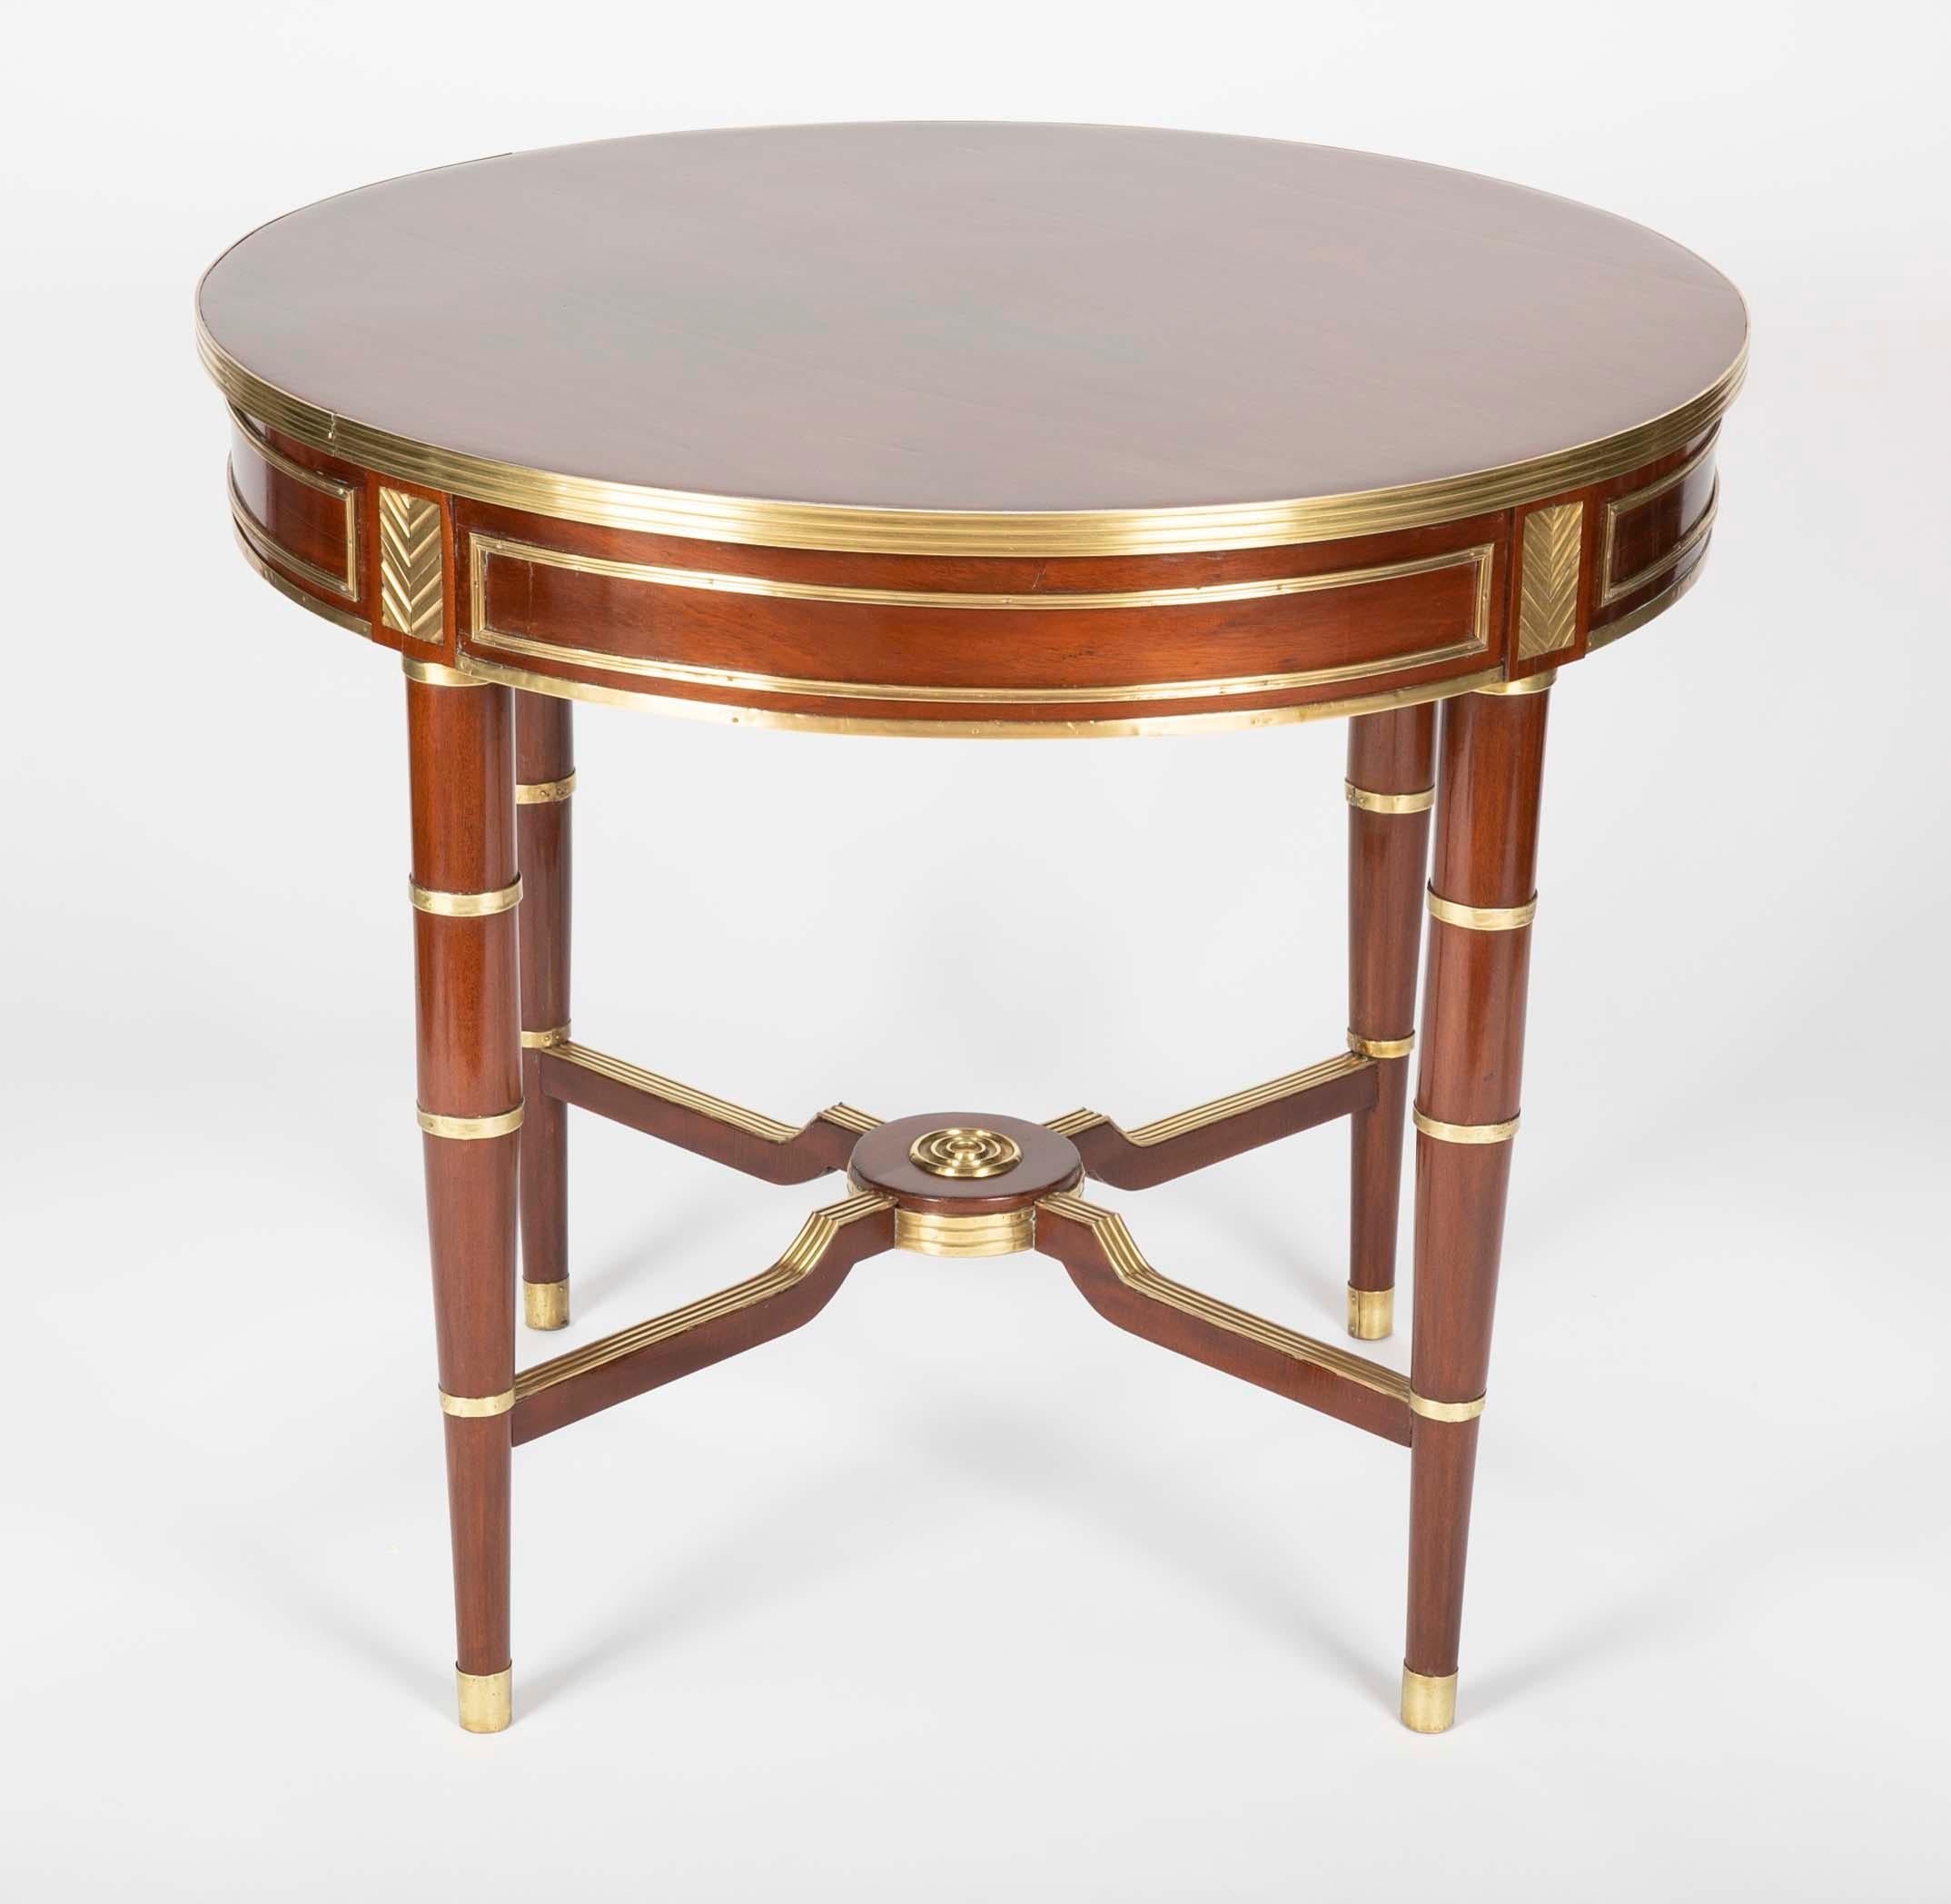 A neoclassical mahogany centre table with brass mountings, 19th century and later. Baltic possibly Russian.